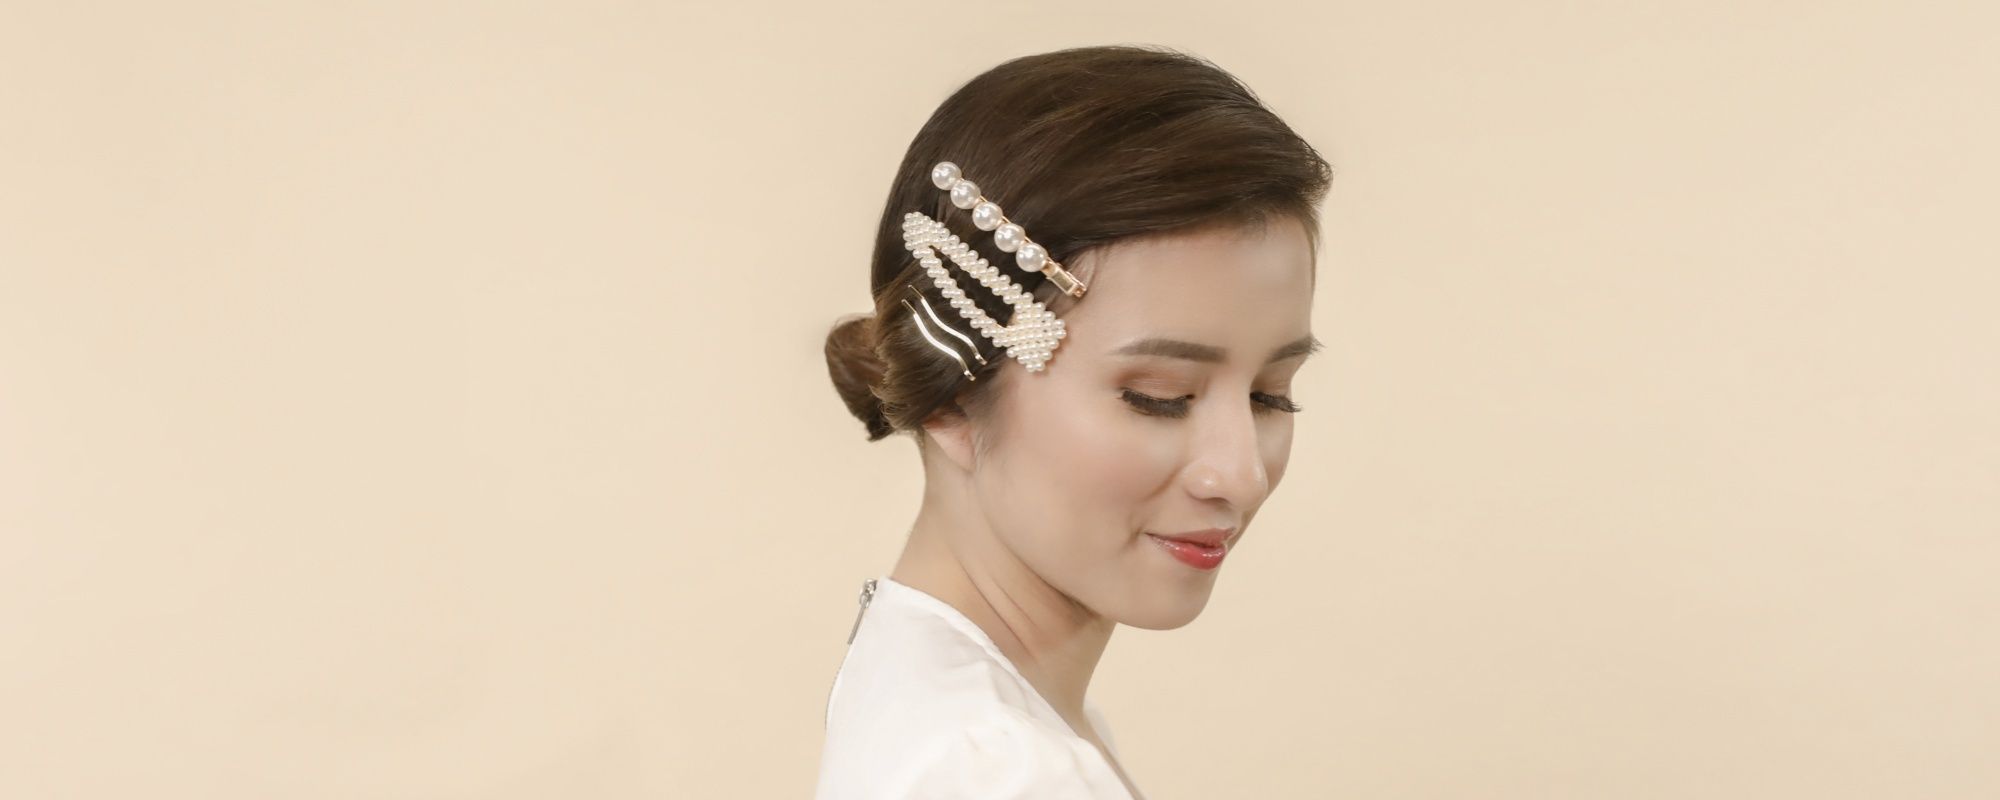 4 Hair Clips Every Woman Should Own To Create Simple At-Home